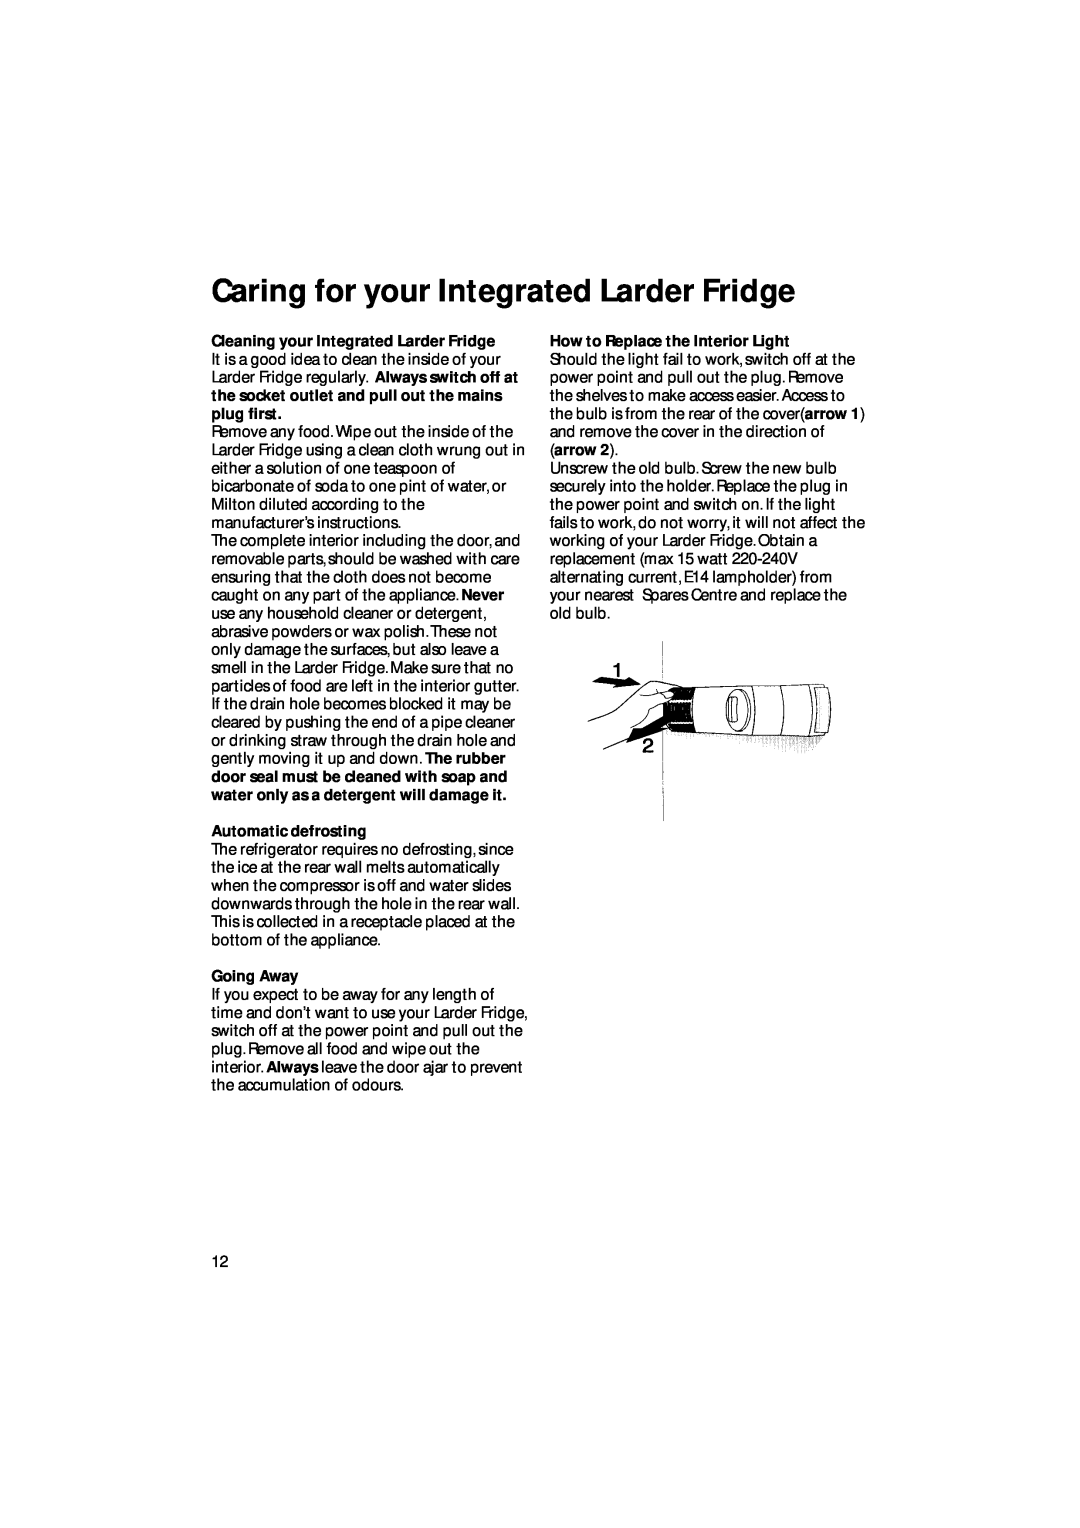 Hotpoint BL31 manual Caring for your Integrated Larder Fridge, Automatic defrosting, Going Away 